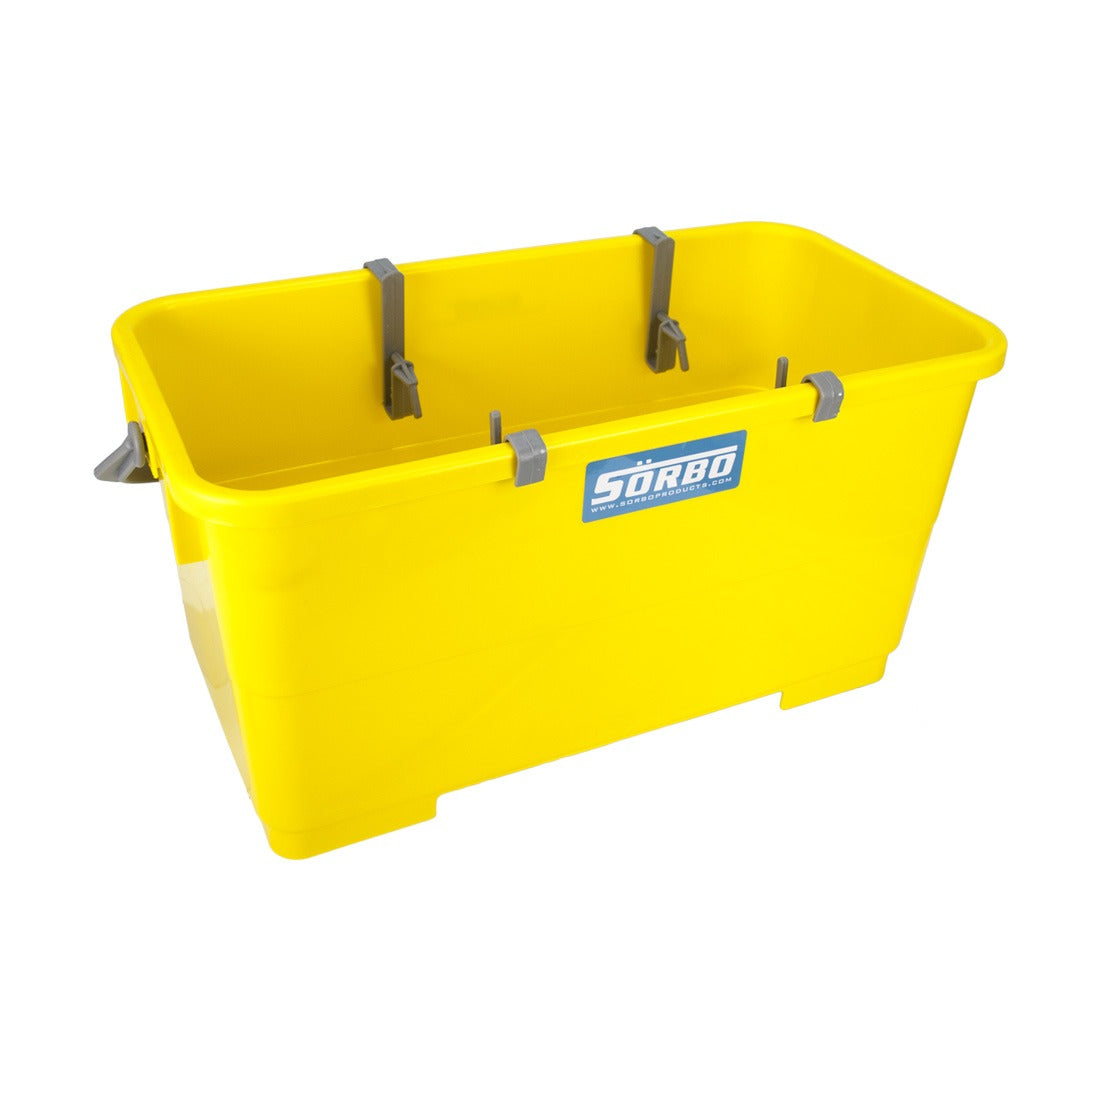 Sörbo Bucket with Clips for Squeegee and Washer for Leif Cart - 18 Inch - Oblique Top View with Clips